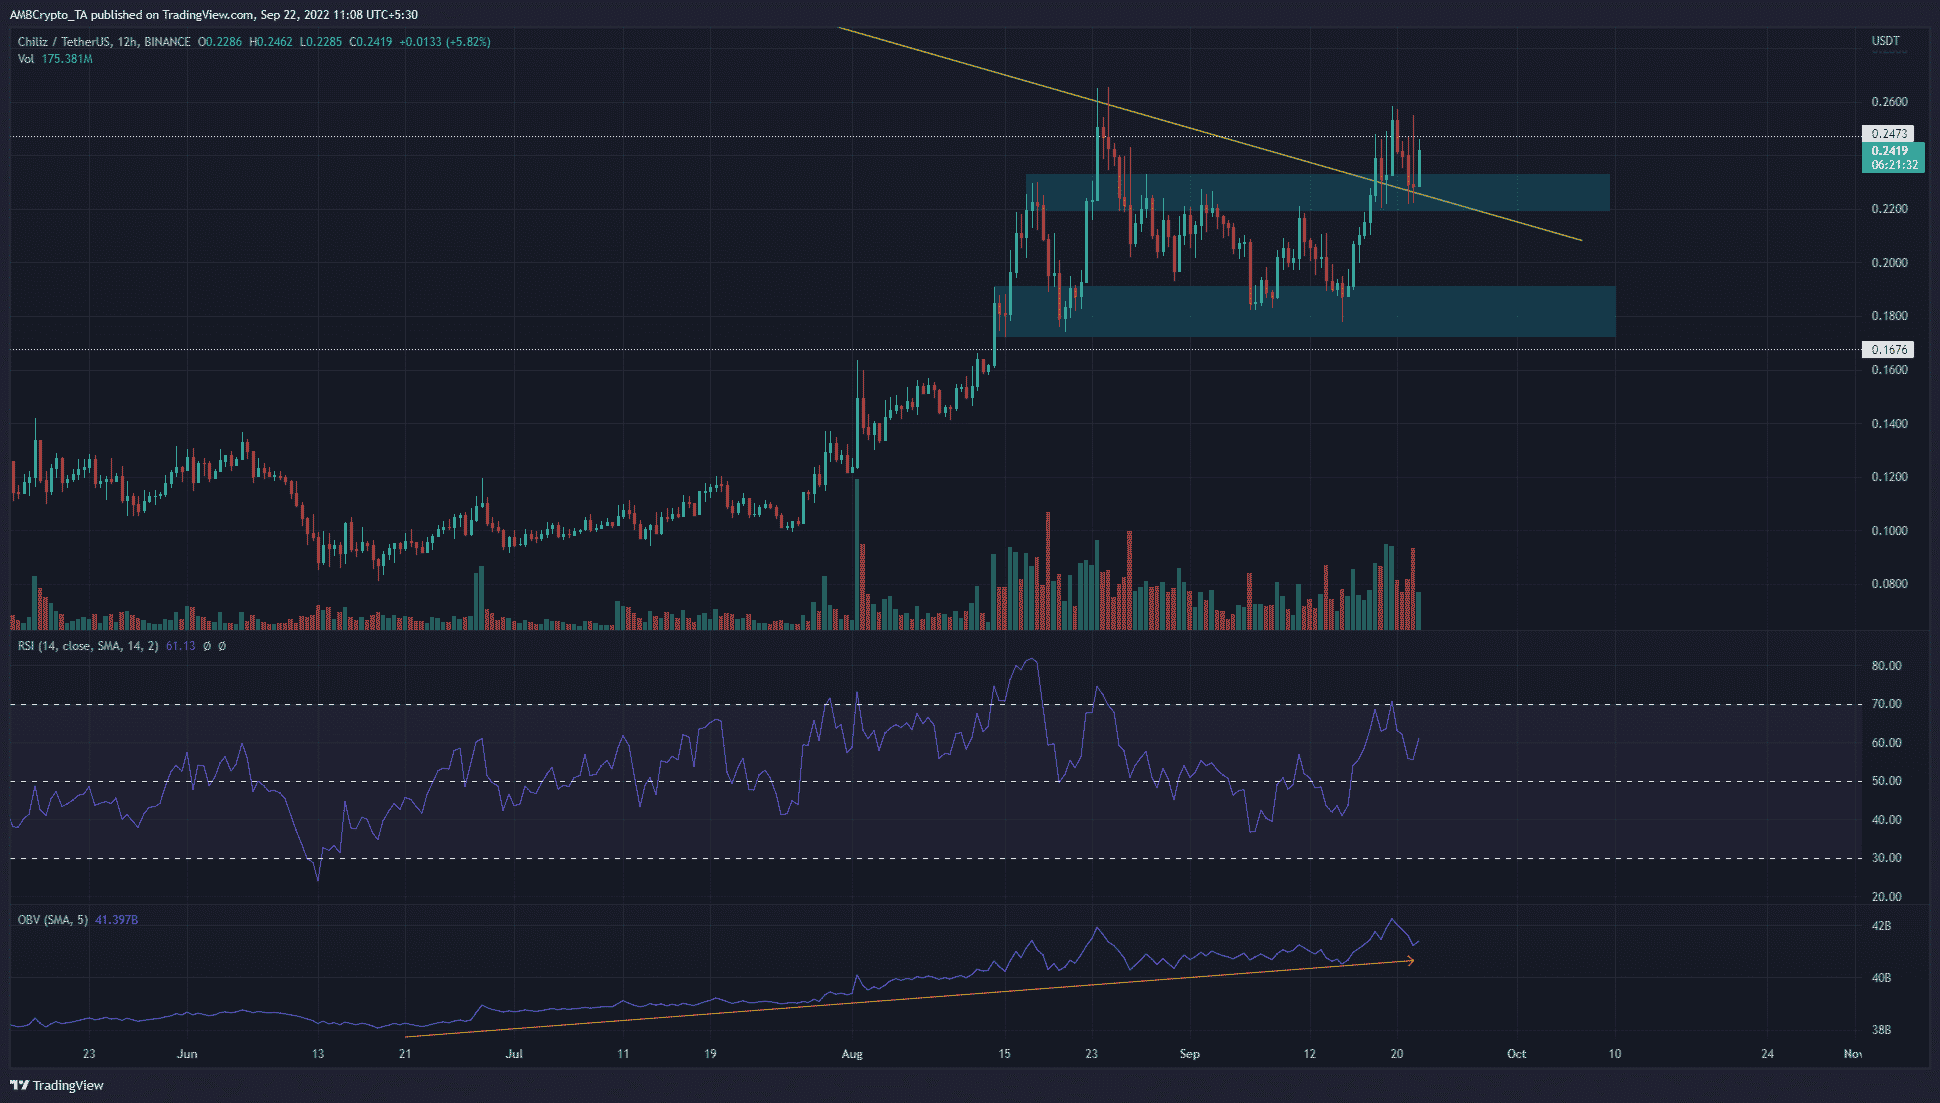 Chiliz on the verge of a bullish breakout, can the World Cup hype help?